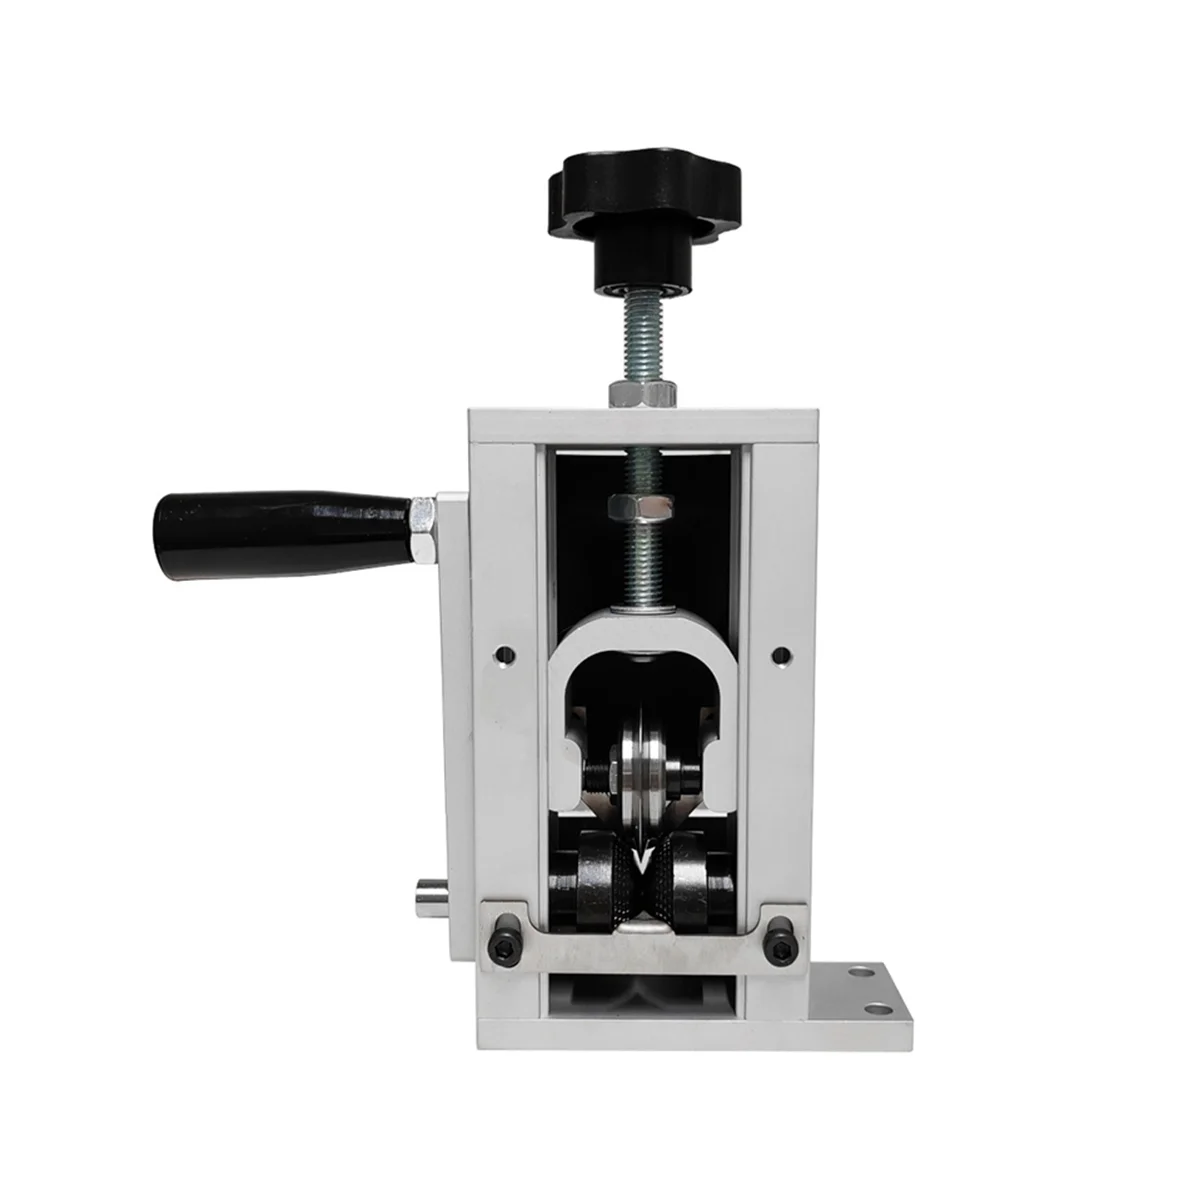 

Upgraded Manual Wire Stripping Machine Hand Crank Drill Operated Stripper for Scrap Copper Stripping Diameter 1-21mm